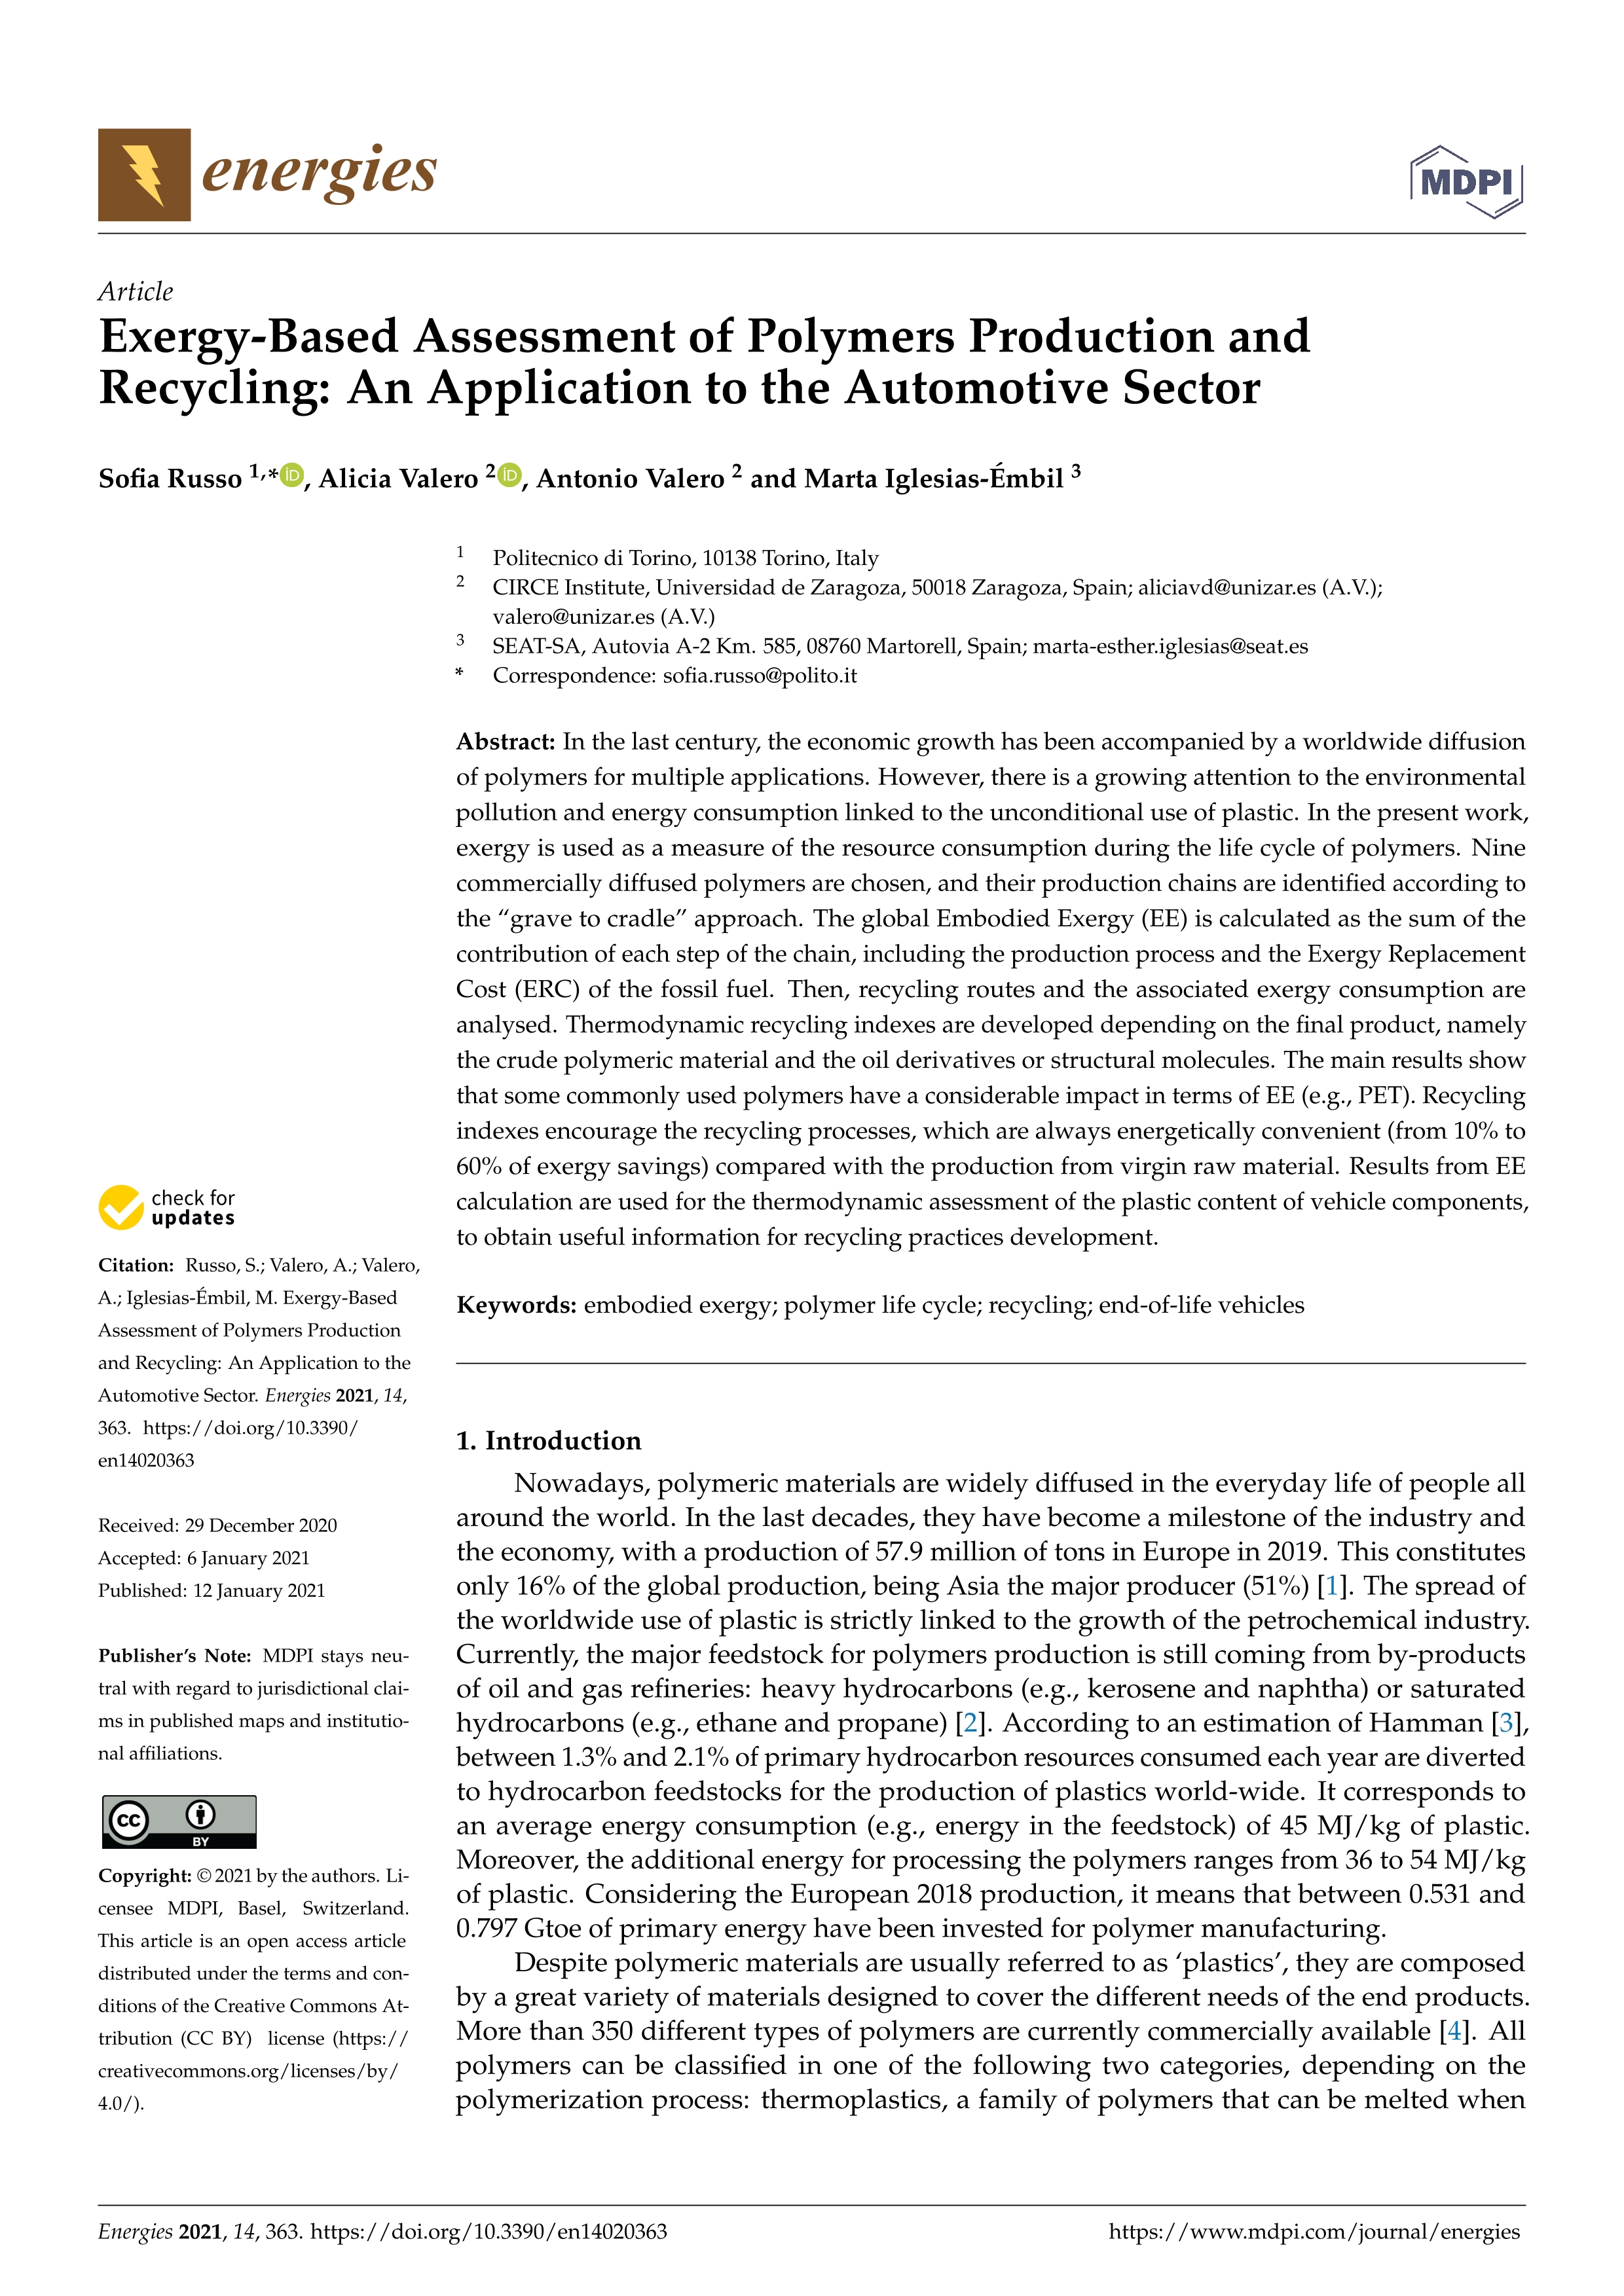 Exergy-based assessment of polymers production and recycling: An application to the automotive sector